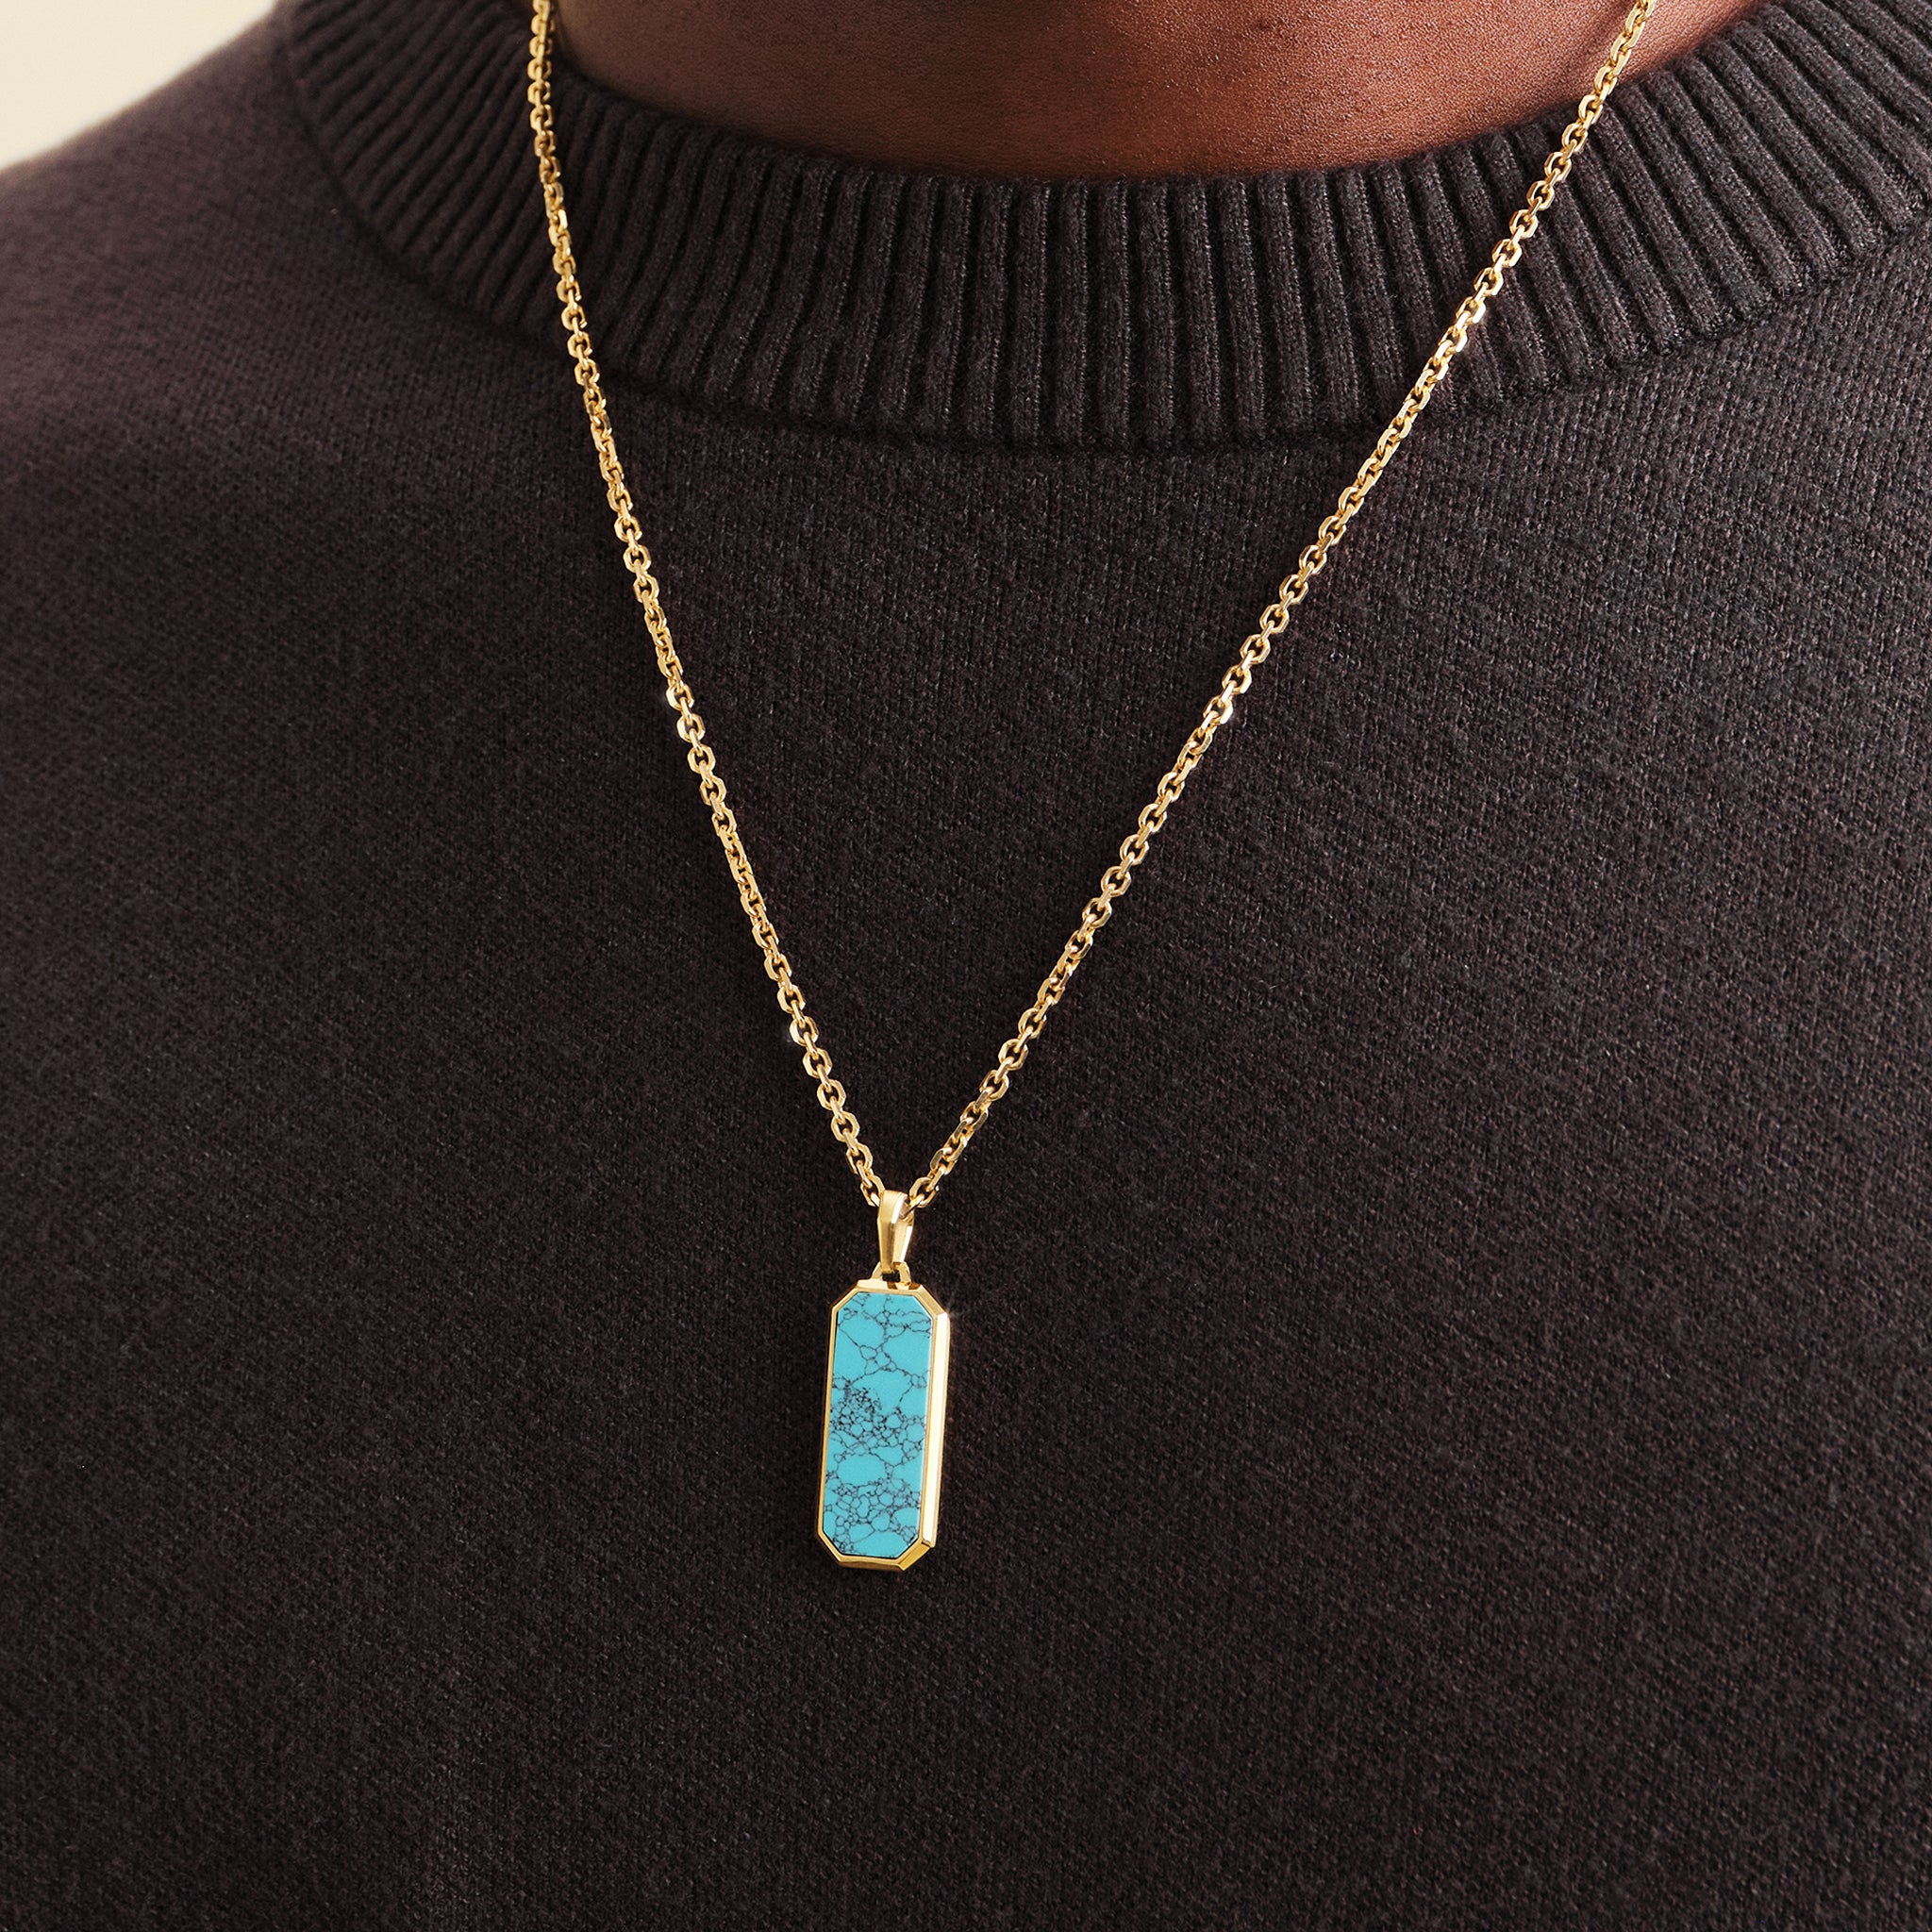 Men's Turquoise Pinnacle Necklace - P43 TQ - William Henry